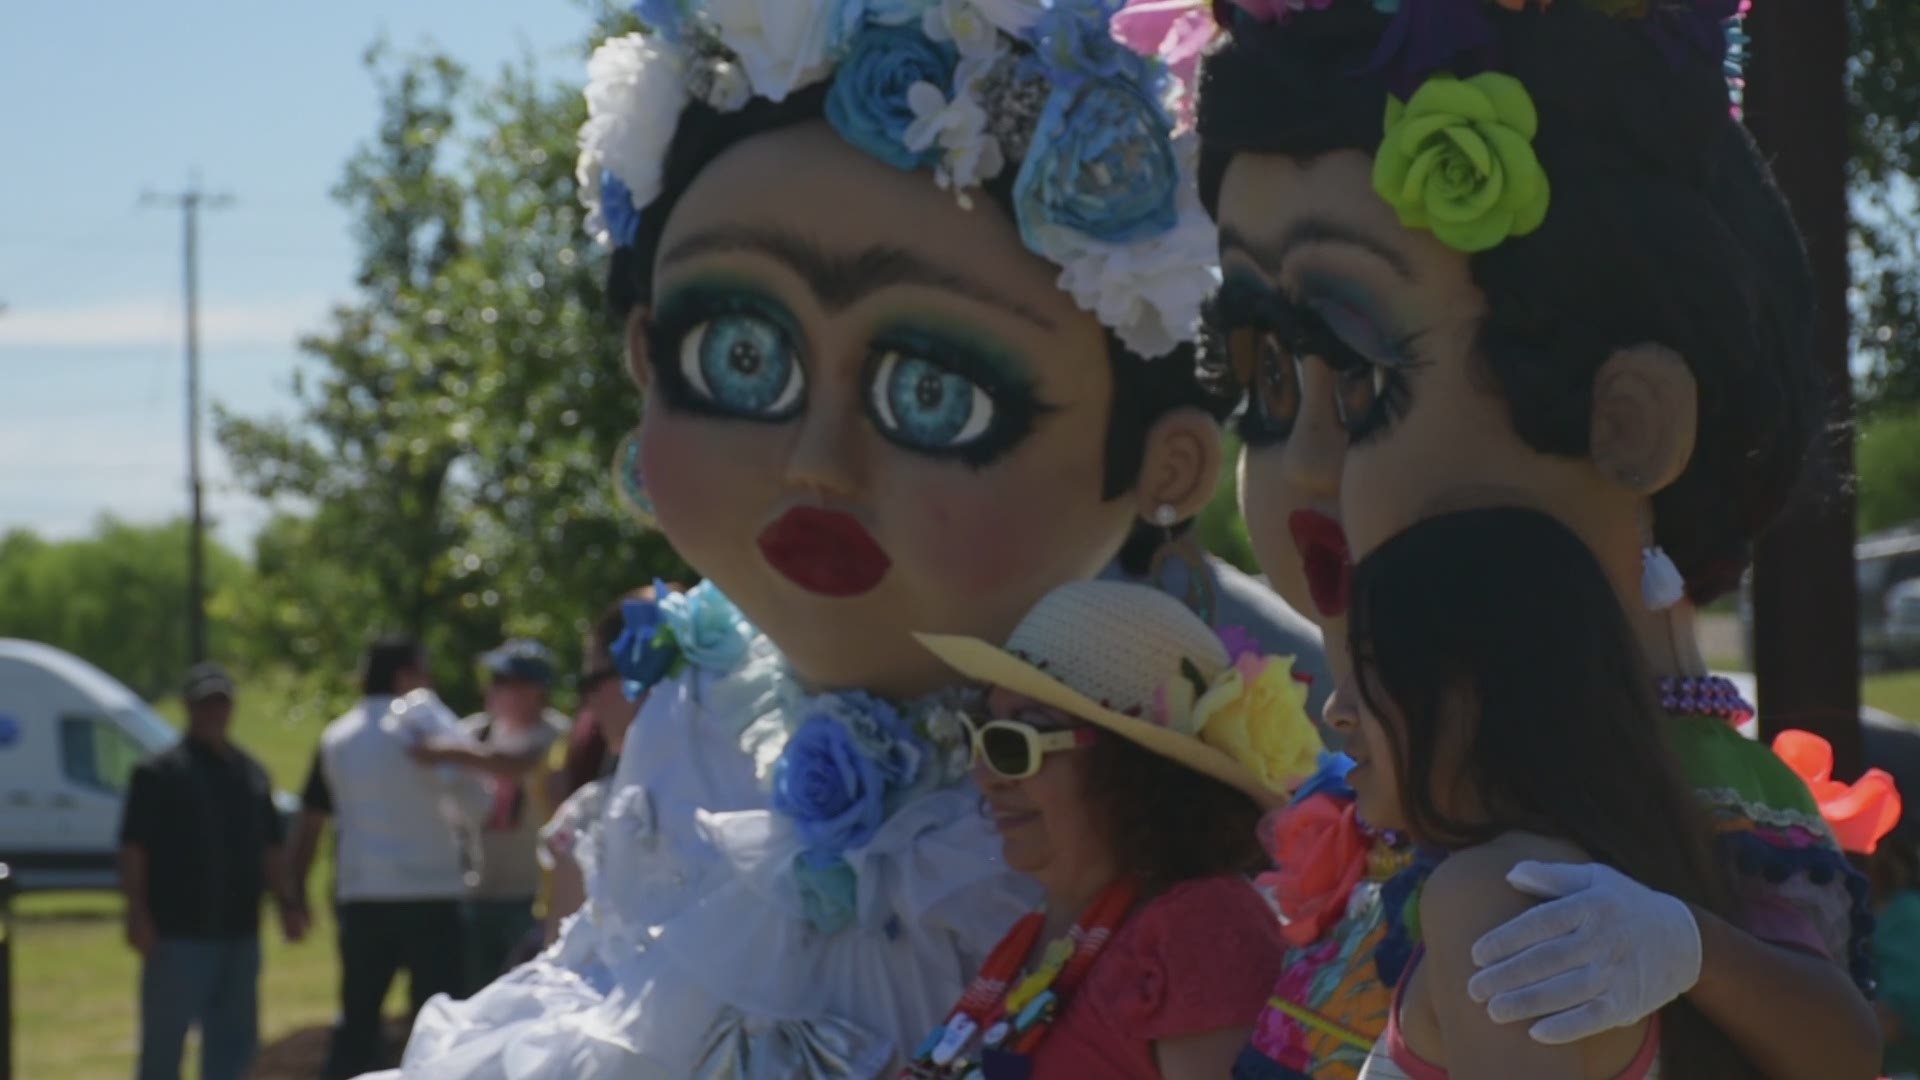 Hundreds turned out to The Greenline Park to celebrate the second year of the new Fiesta event